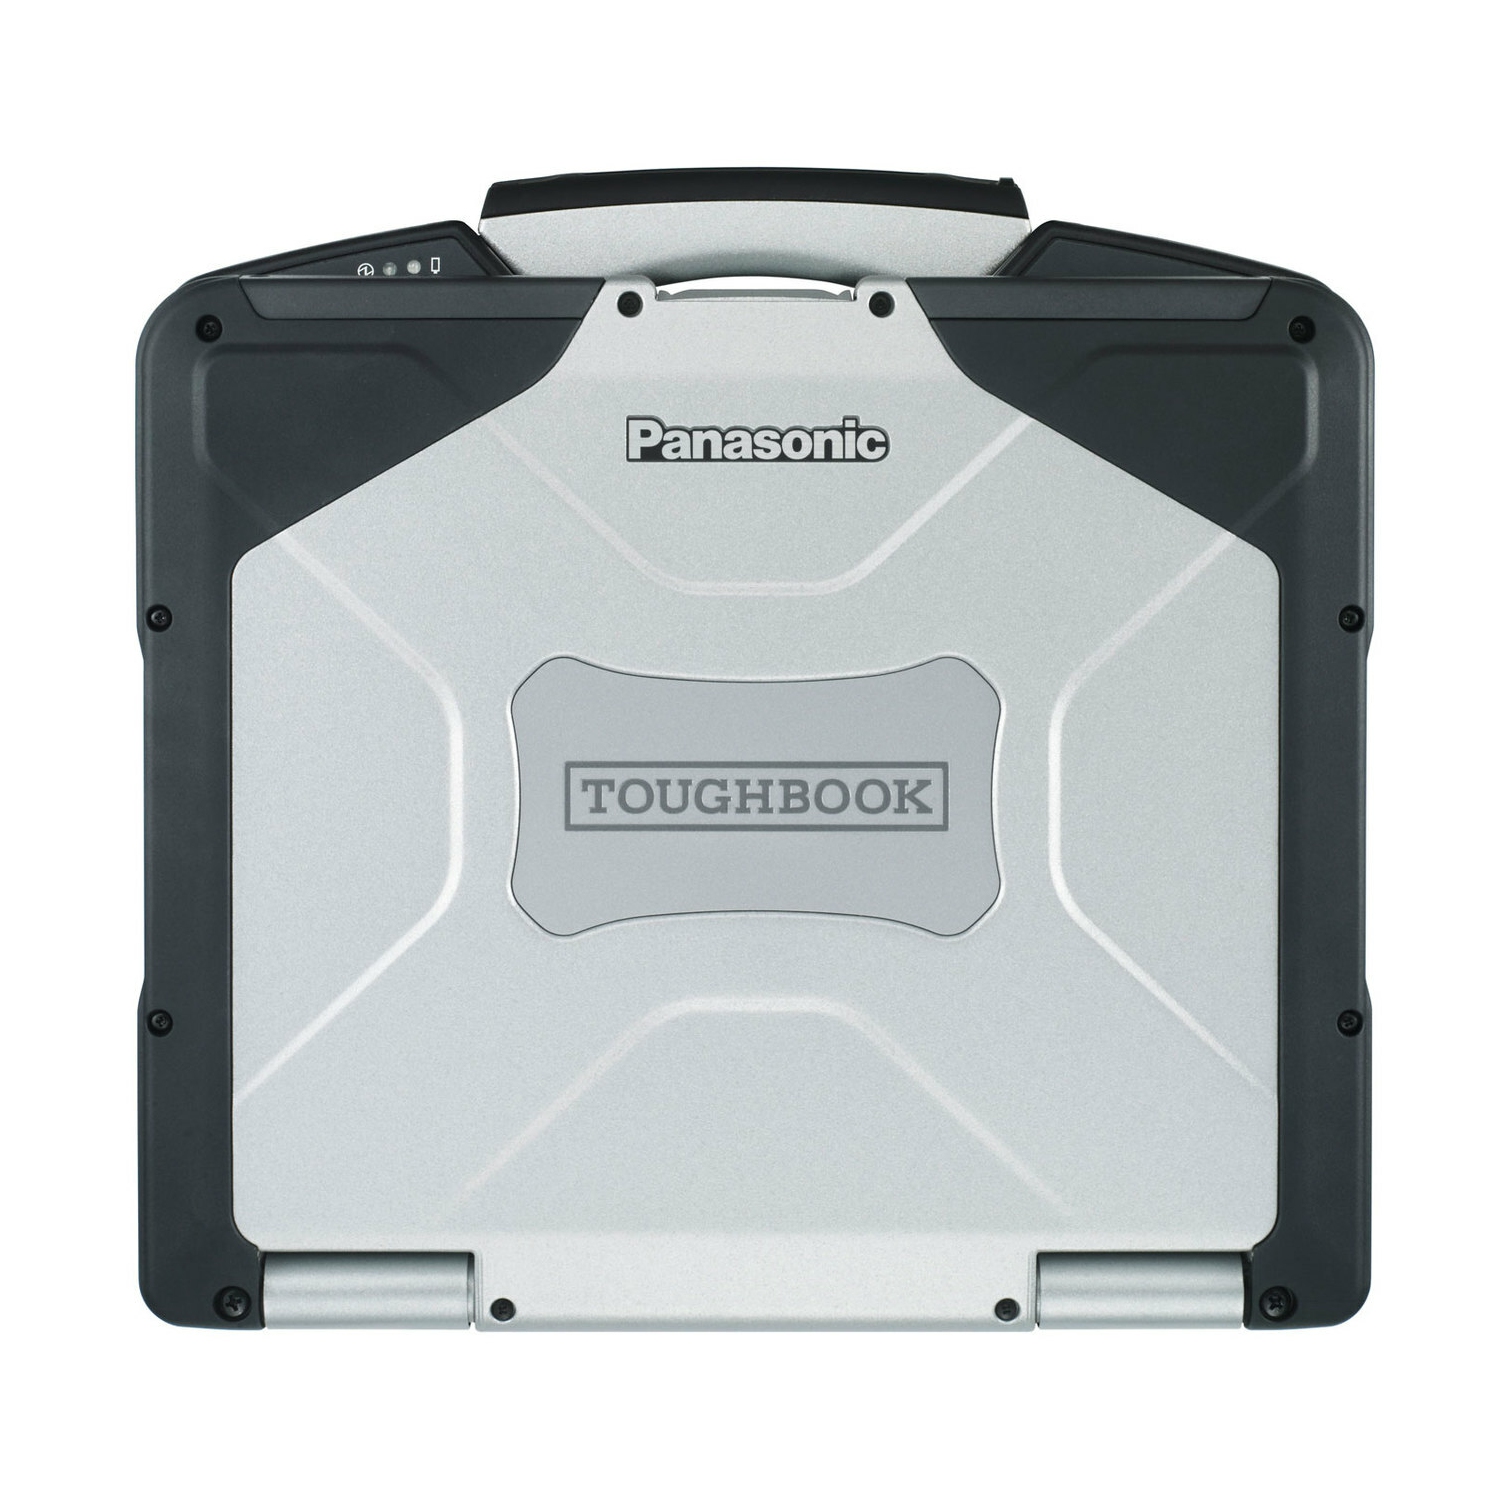 Refurbished (Excellent) - Panasonic Toughbook CF-31 Fully Rugged 2.4GHz Intel Core i5, BASIC - Grade A